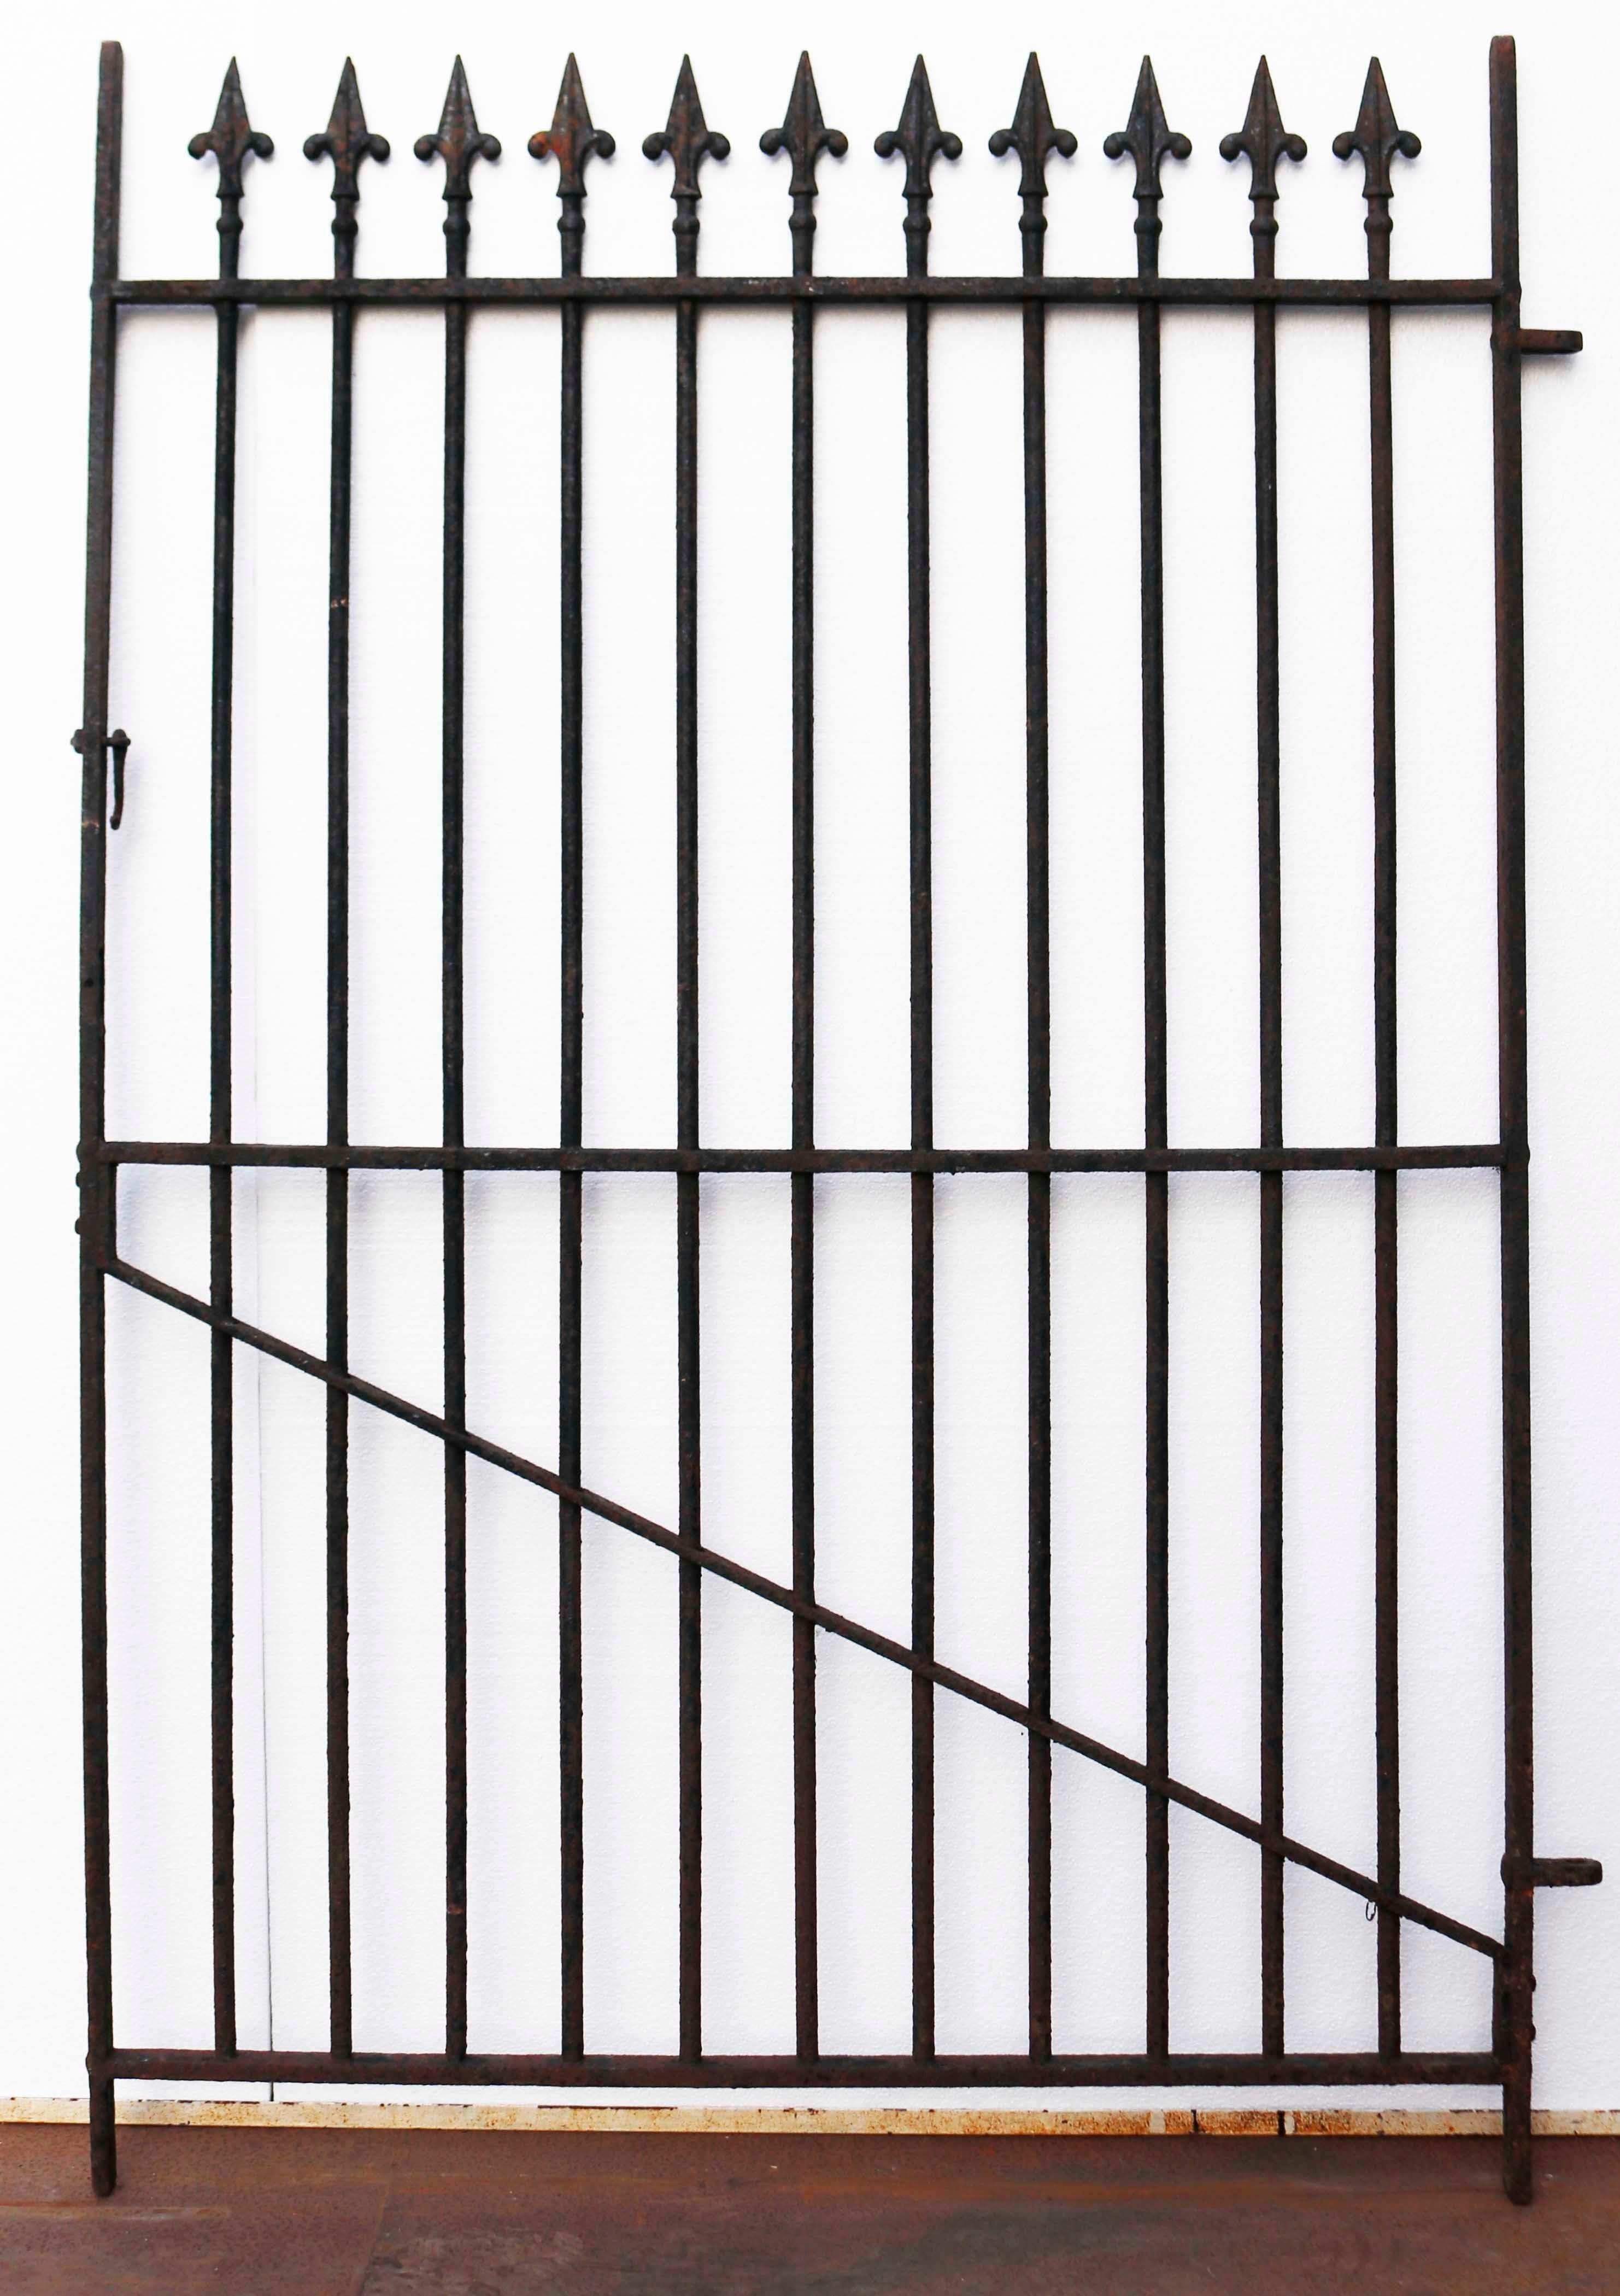 19th Century Antique Wrought Iron Gate with Decorative Finials